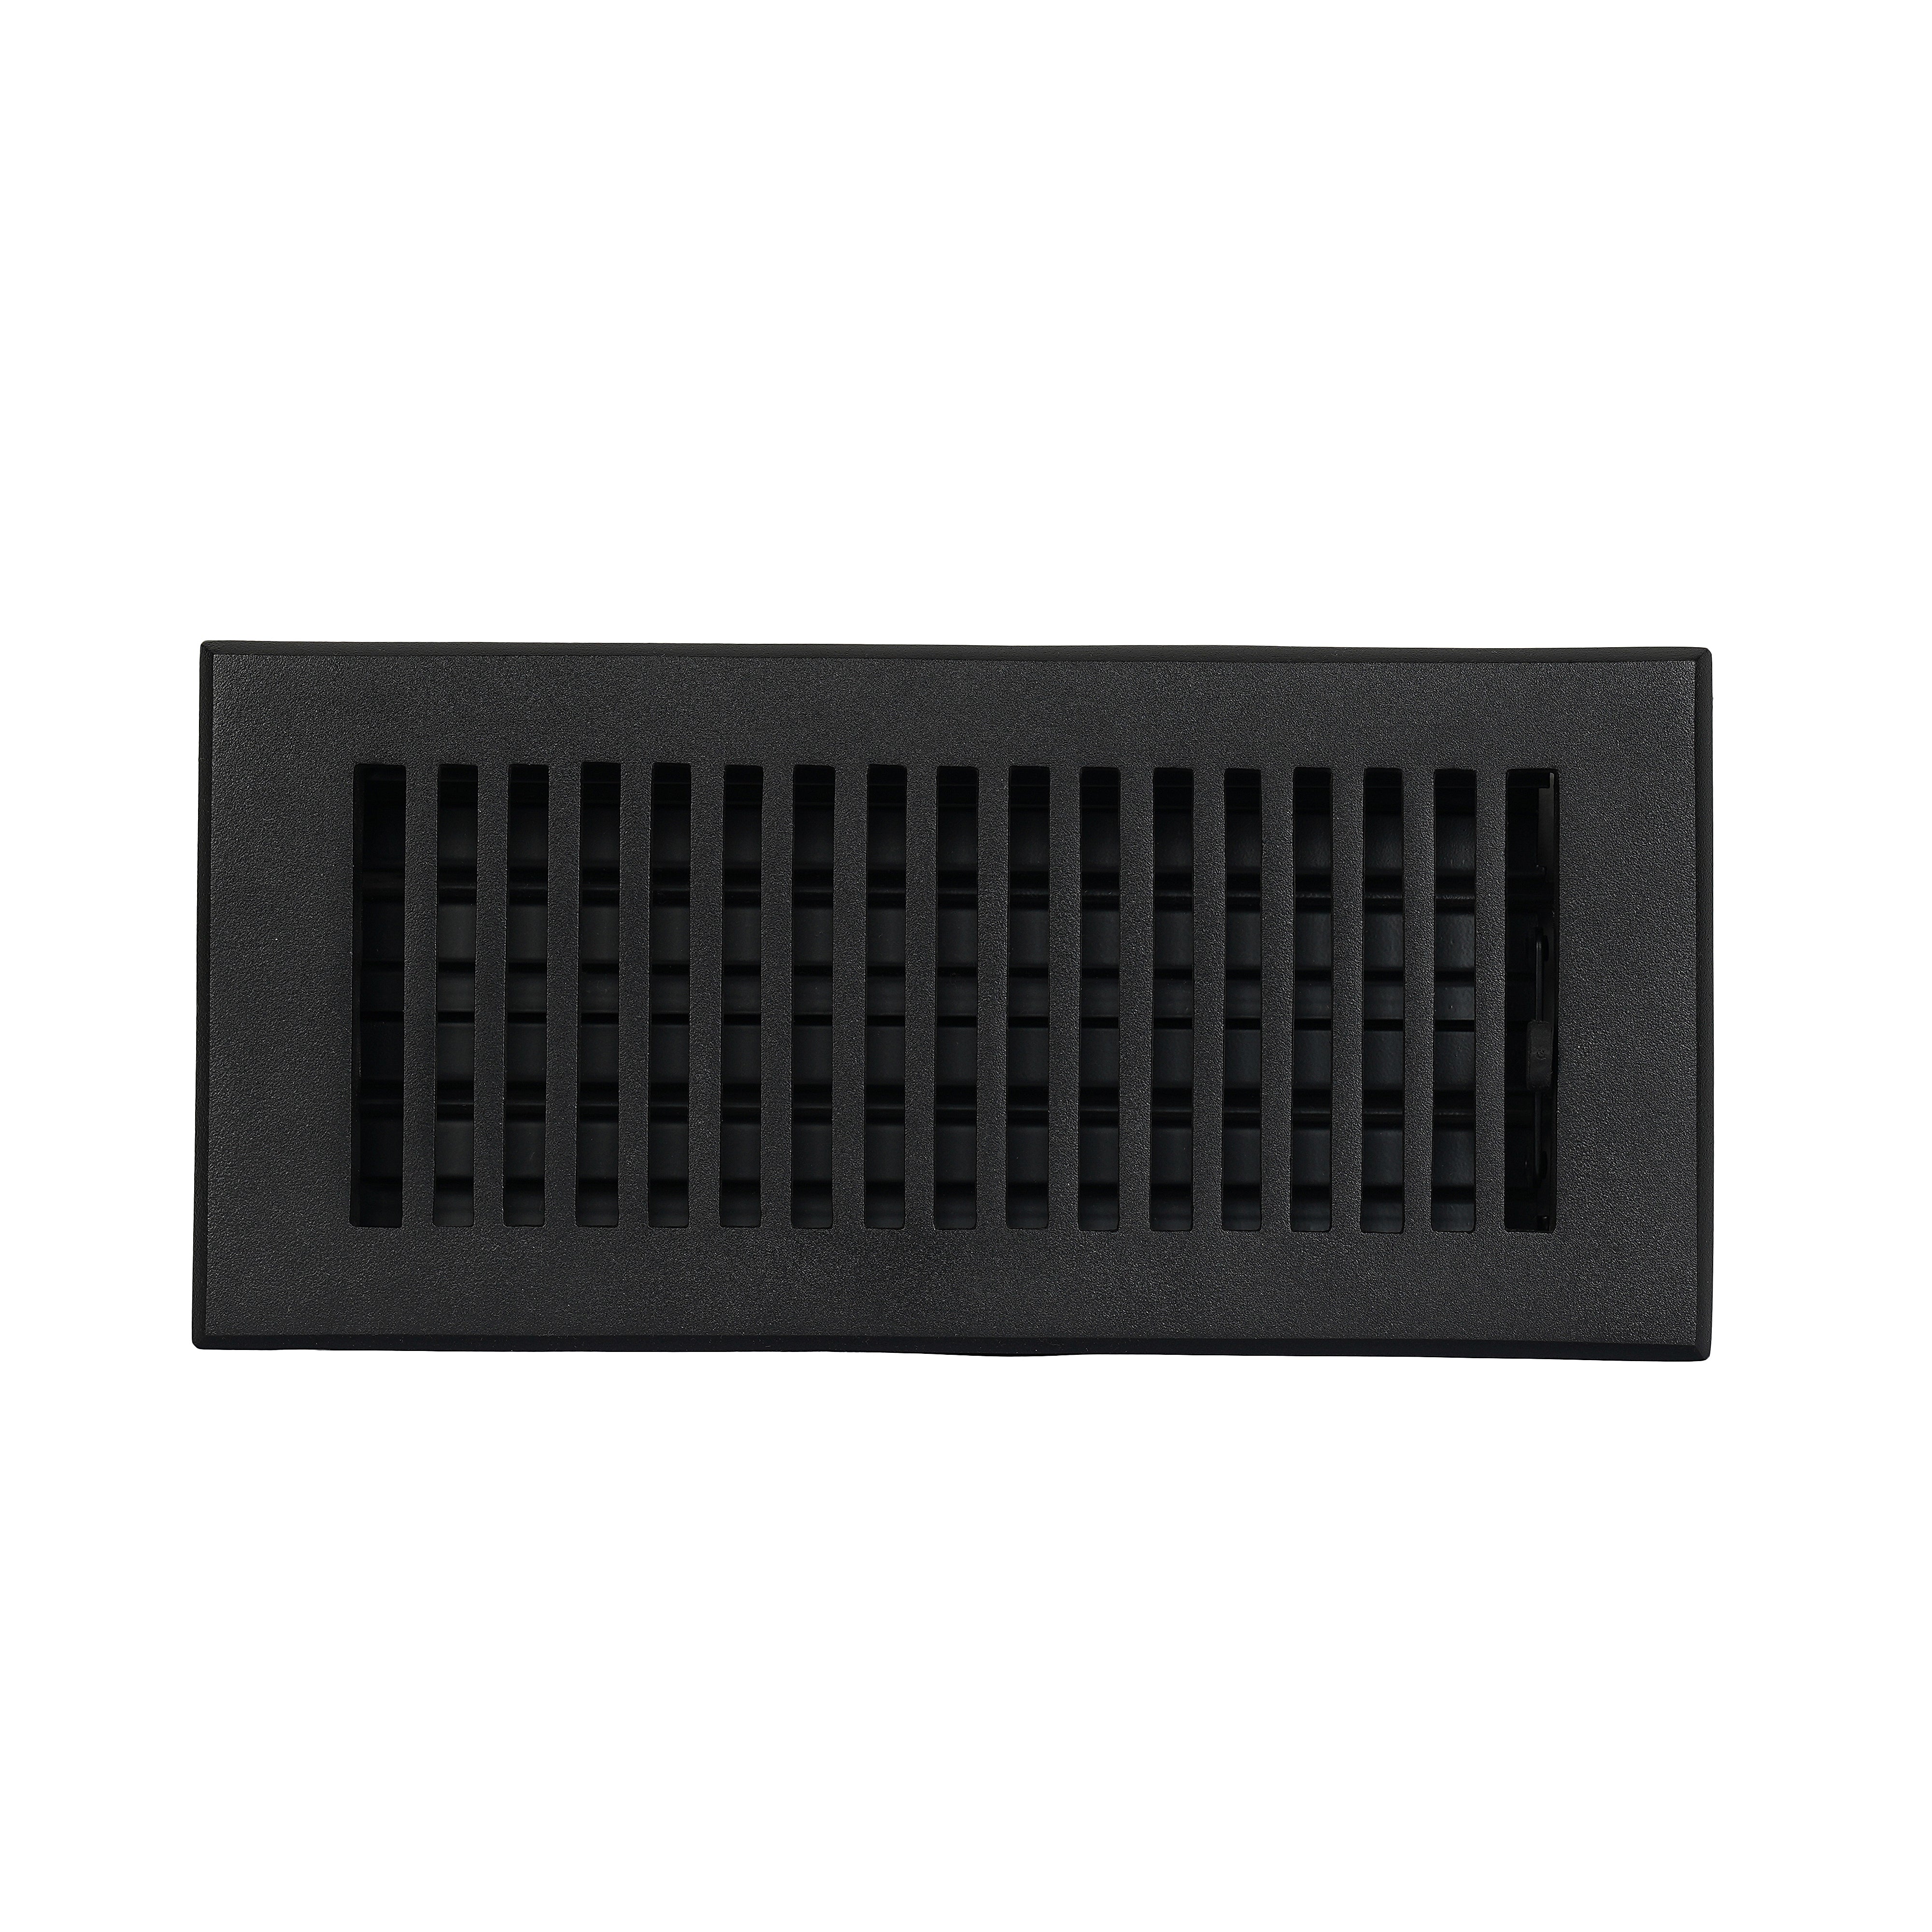 Sleek 6"x12" Solid Cast Aluminum Air Supply louvered Vent |Powder Coated